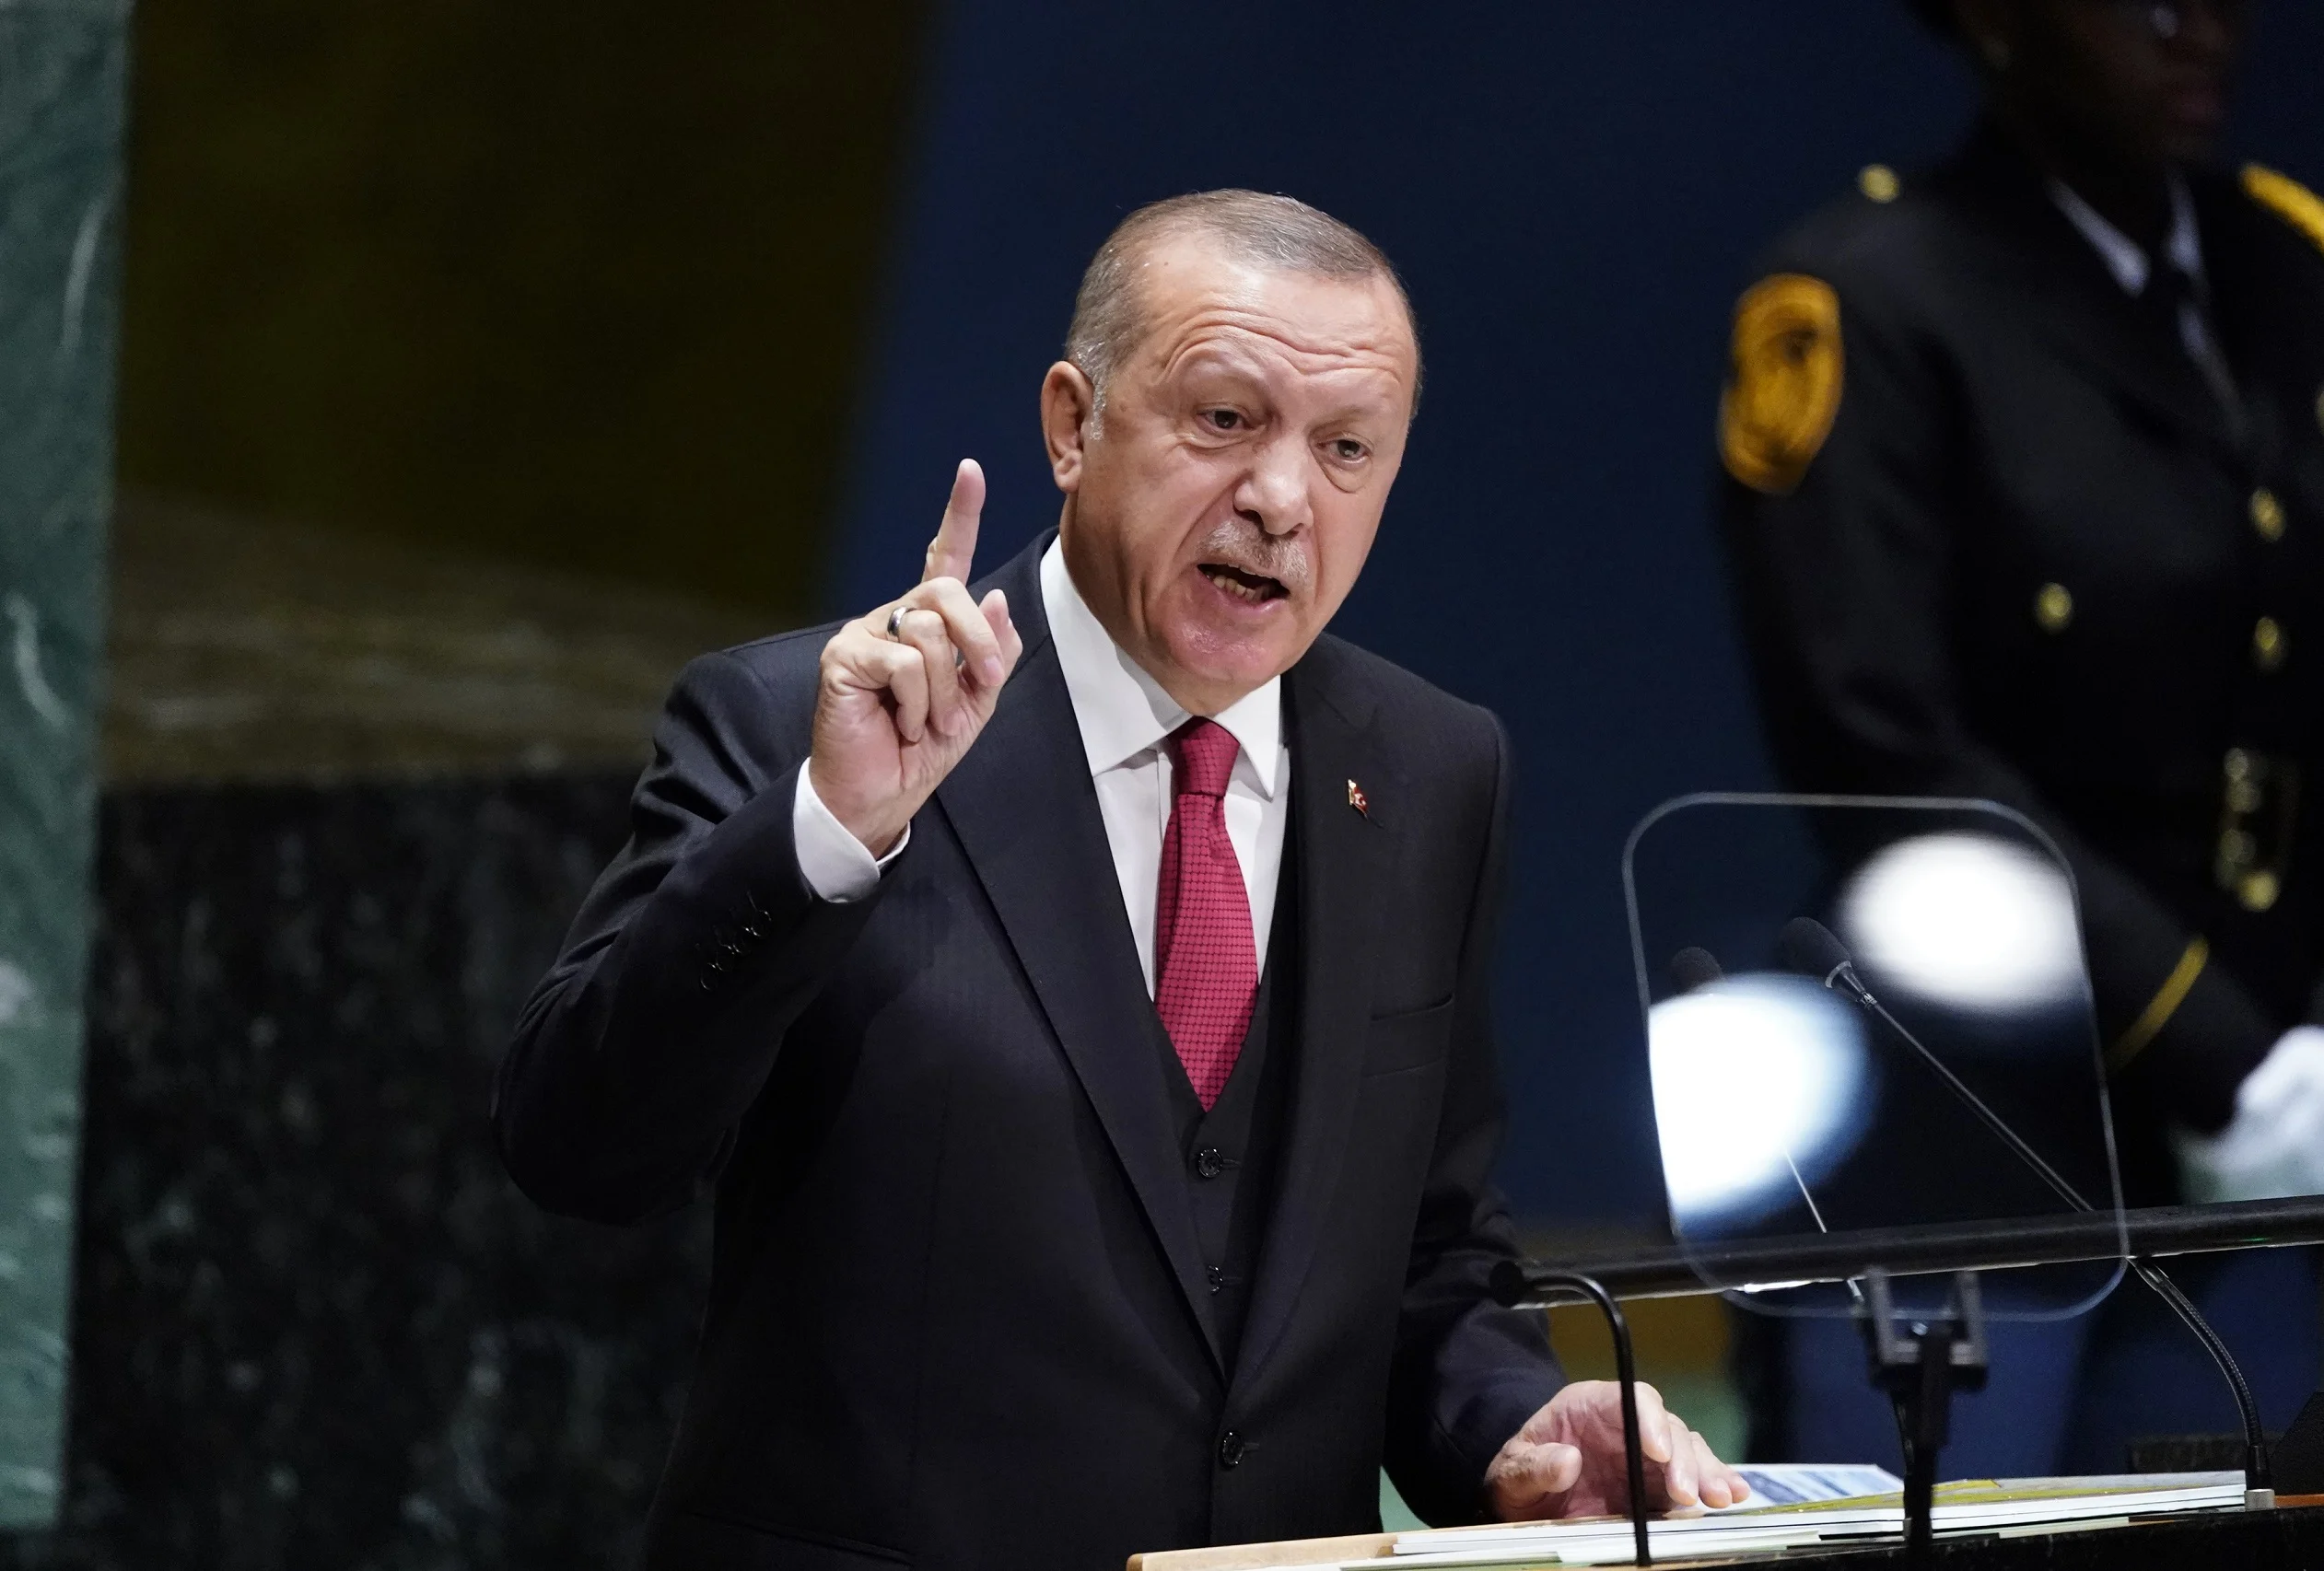 Turkey's President Recep Tayyip Erdogan Addresses The 74th Session Of The United Nations General Assembly At U.n. Headquarters In New York City, New York, U.s.